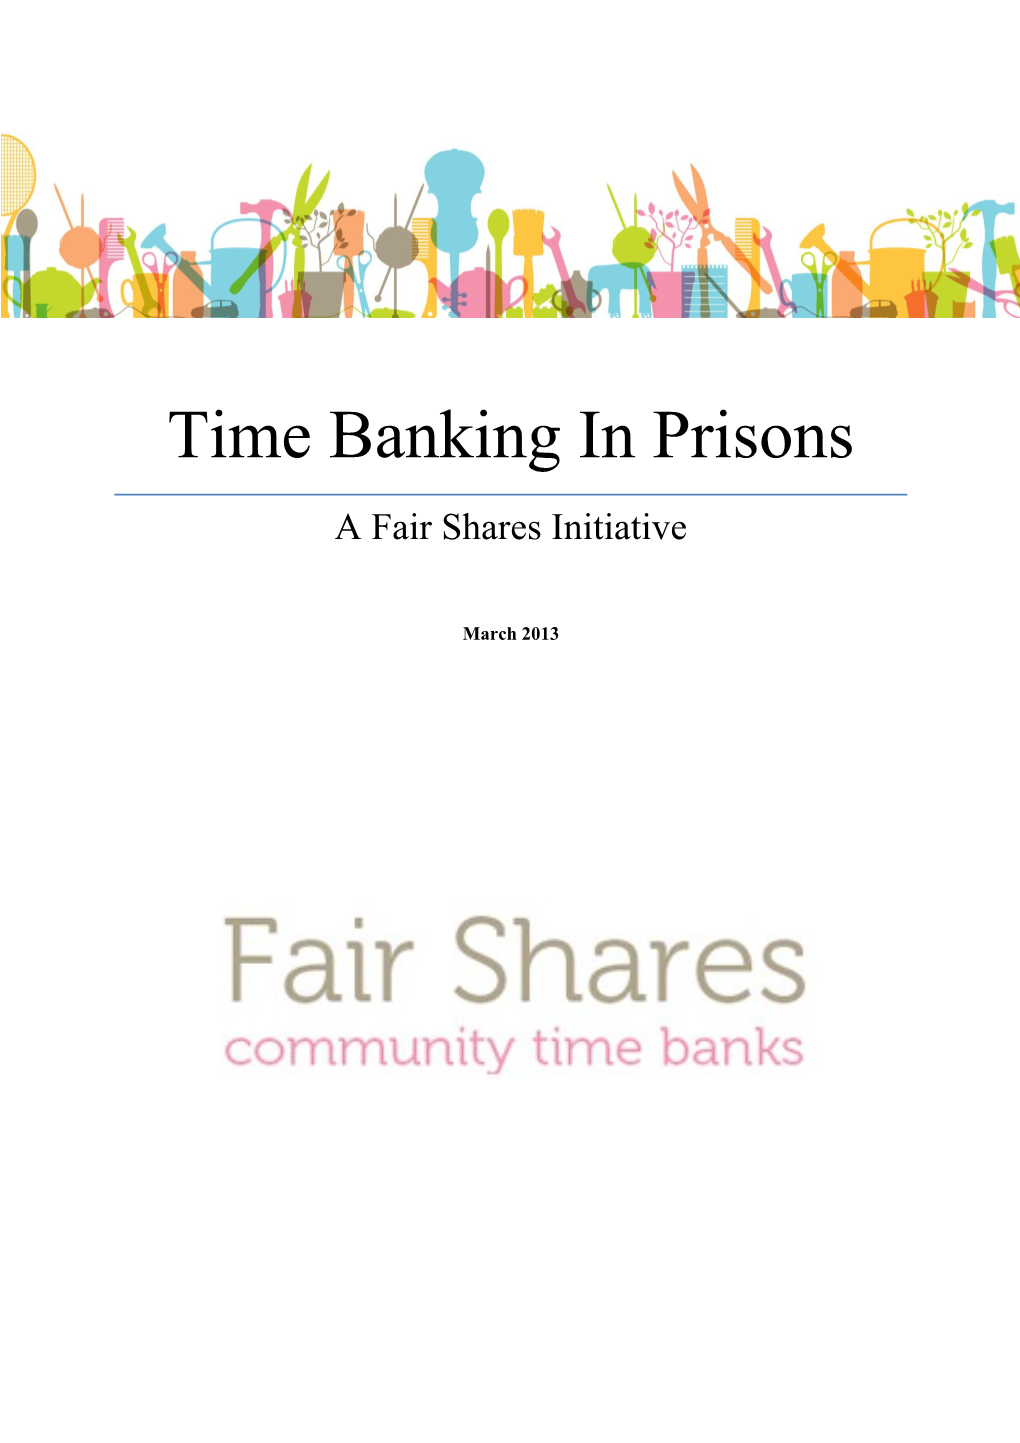 Time Banking in Prisons